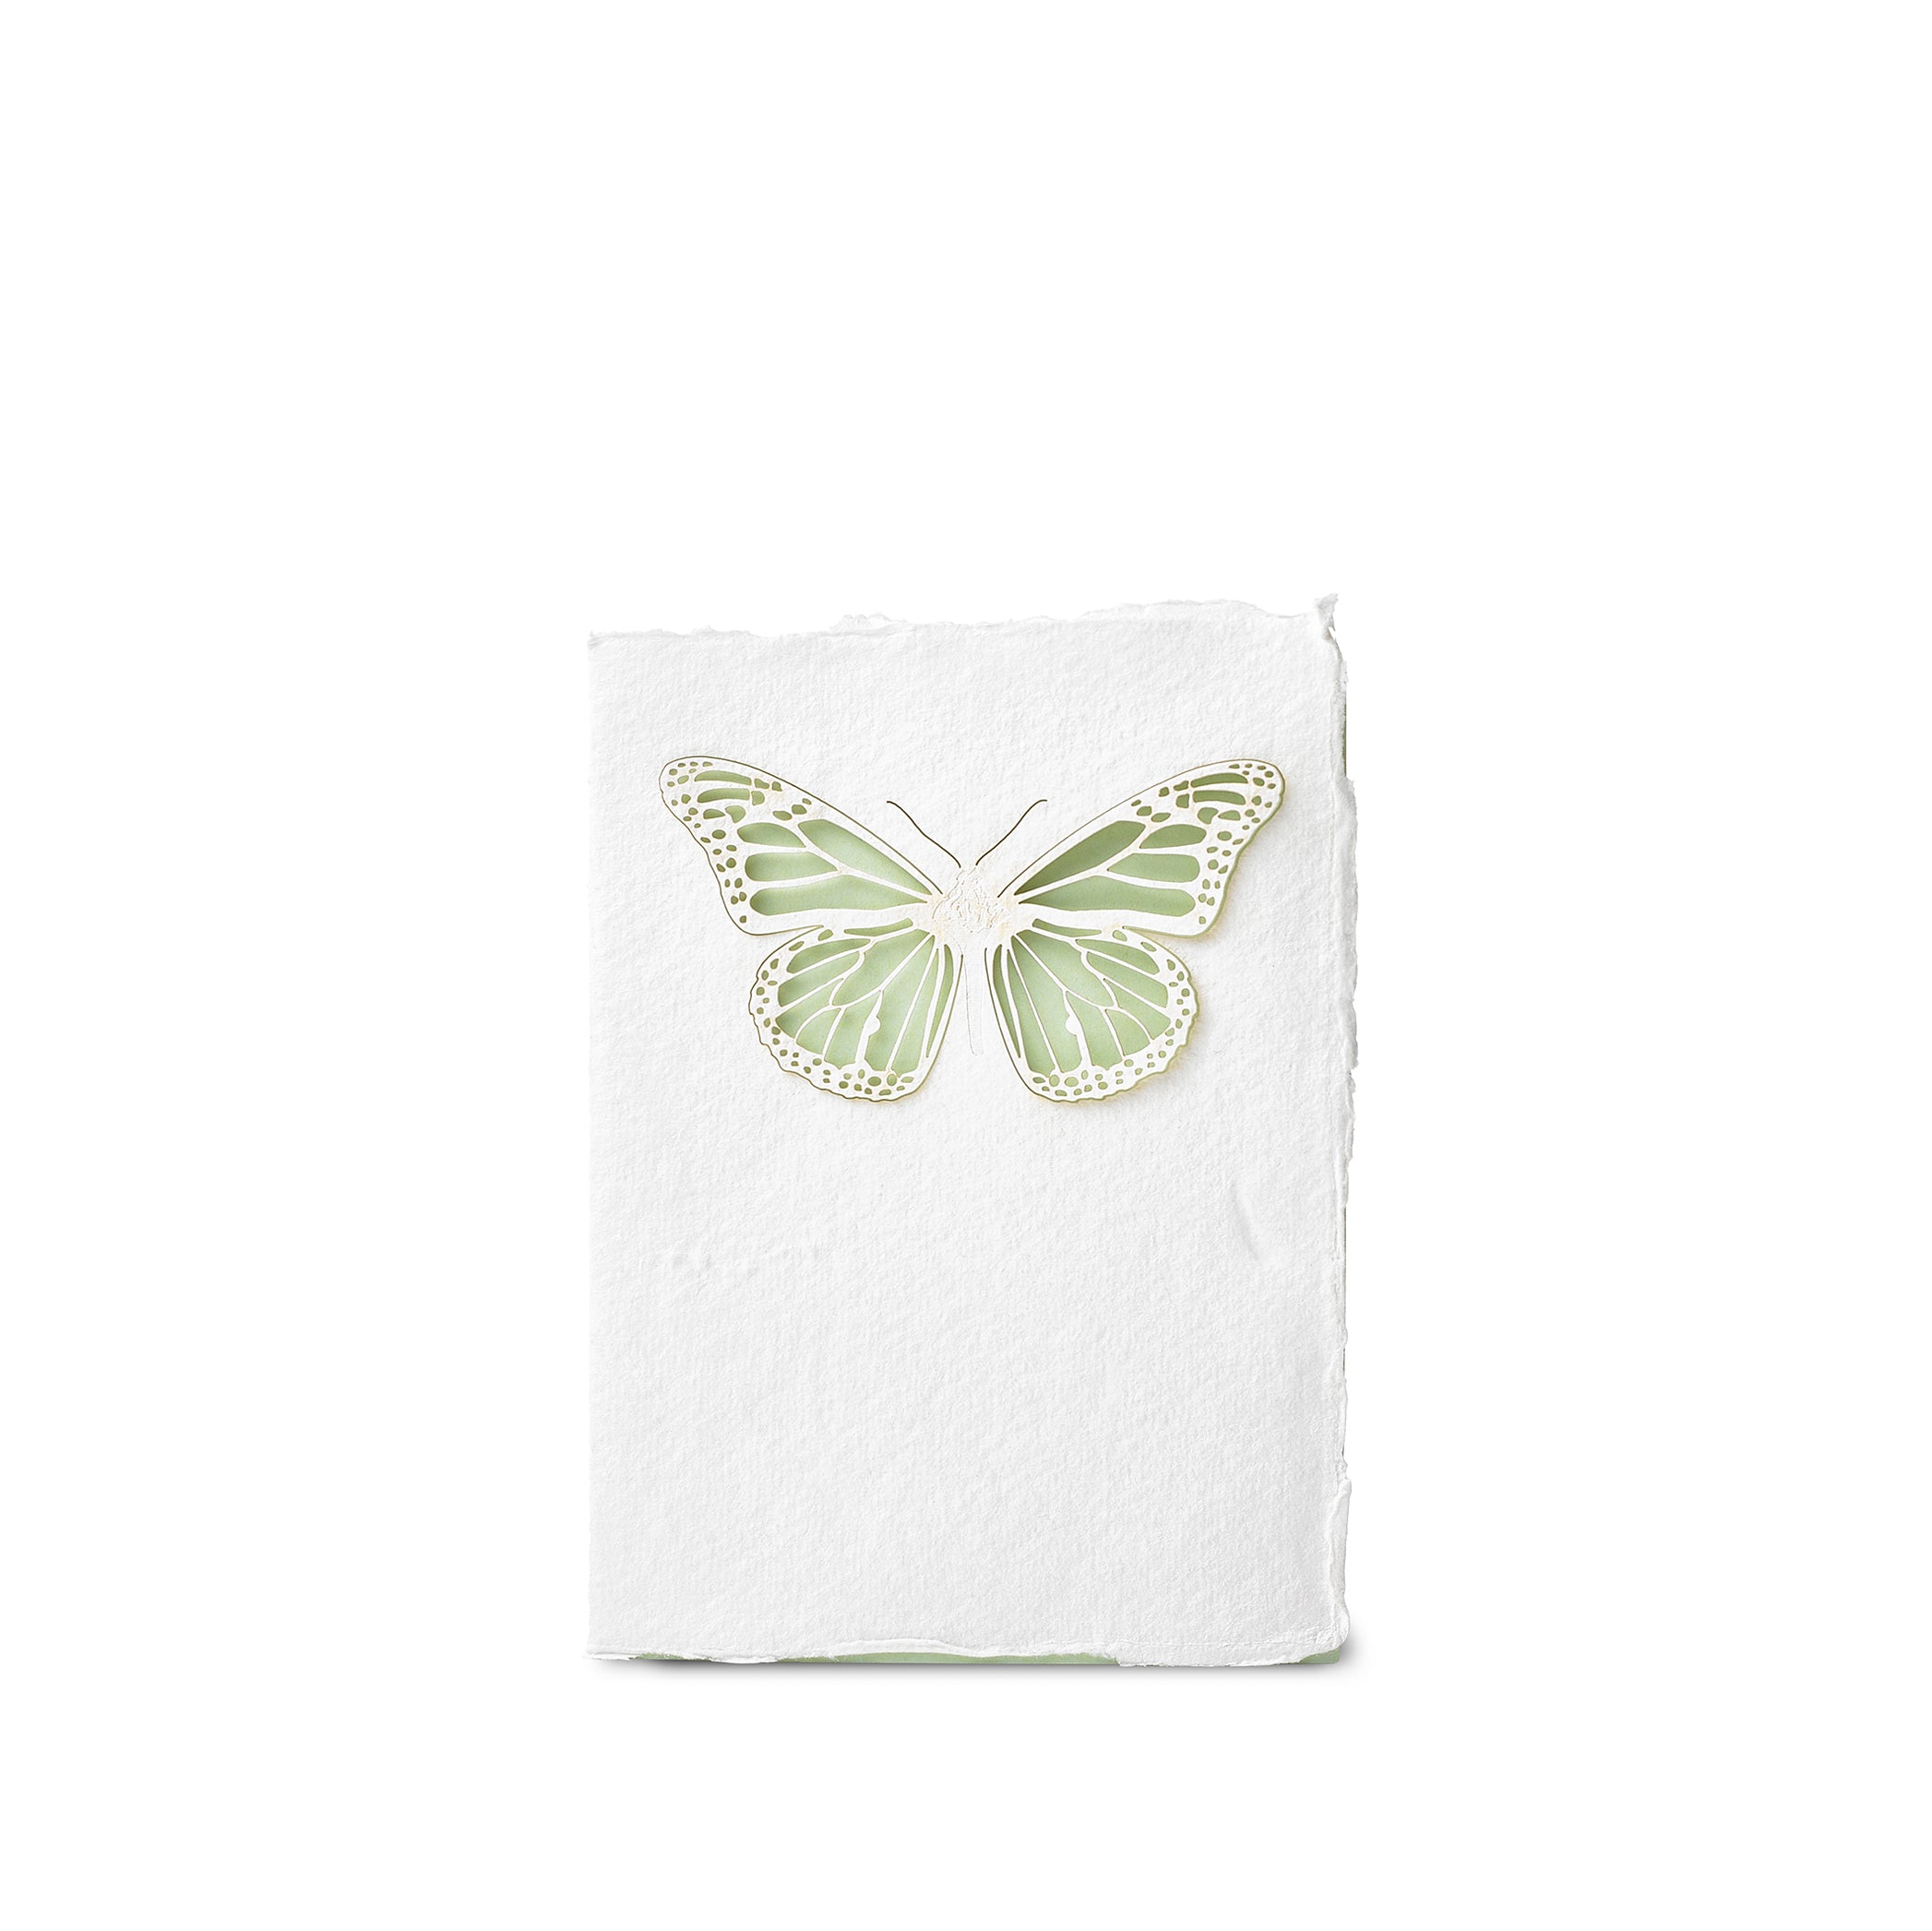 Handmade Paper Greeting Card with Butterfly, 15cm x 10cm